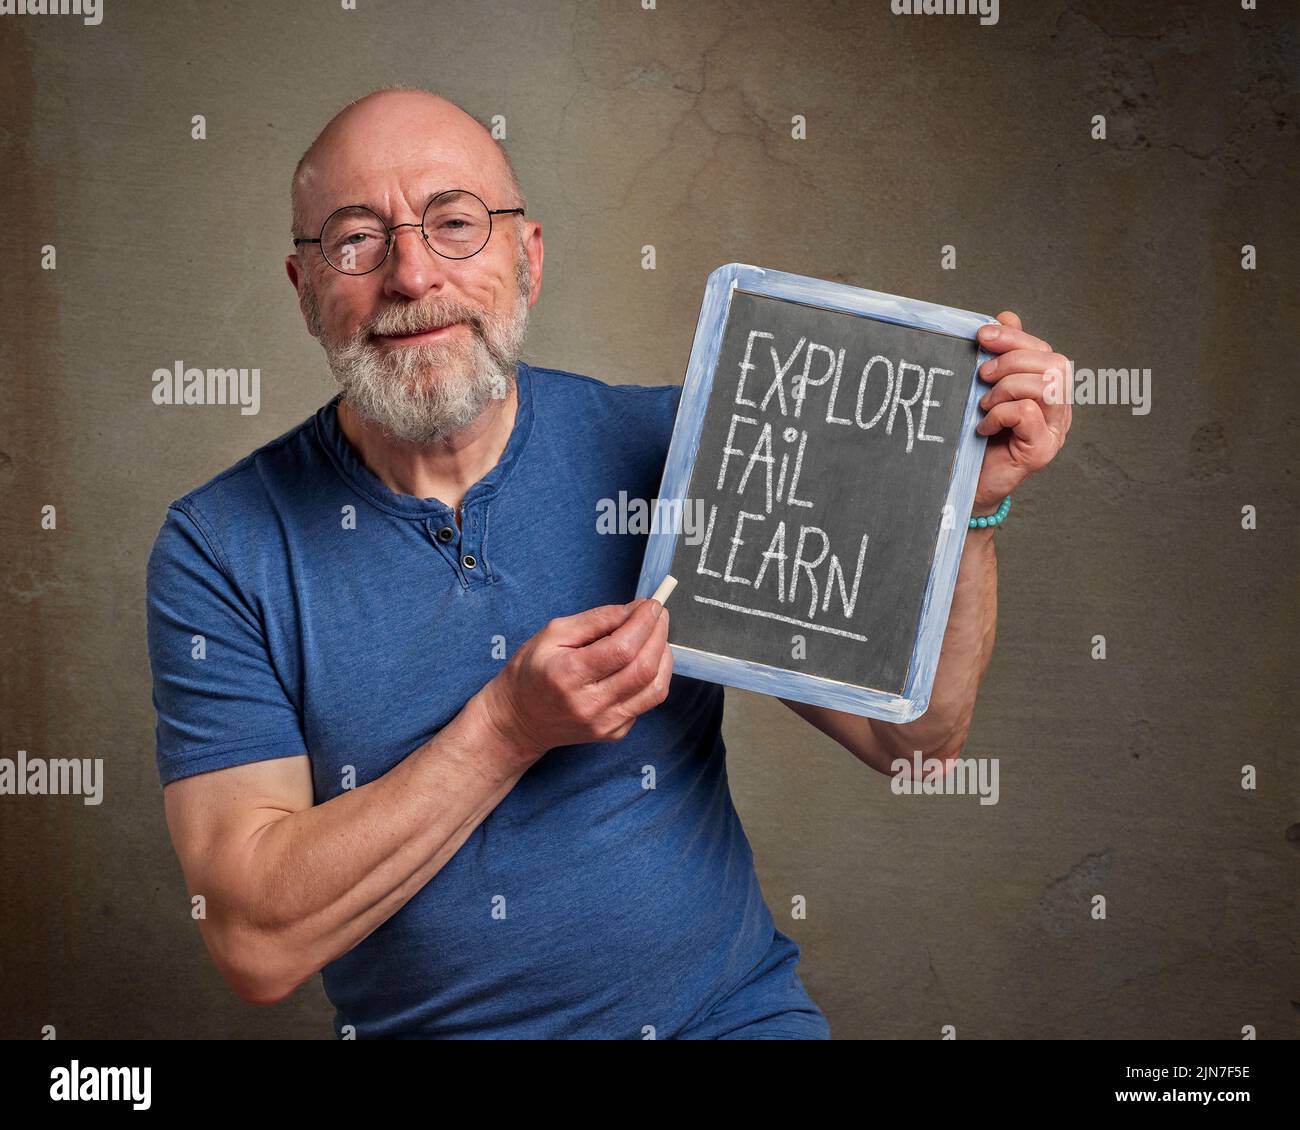 explore, fail and learn - inspirational note, white chalk writing on a slate blackboard held by a senior man, teacher or mentor, challenge, success an Stock Photo